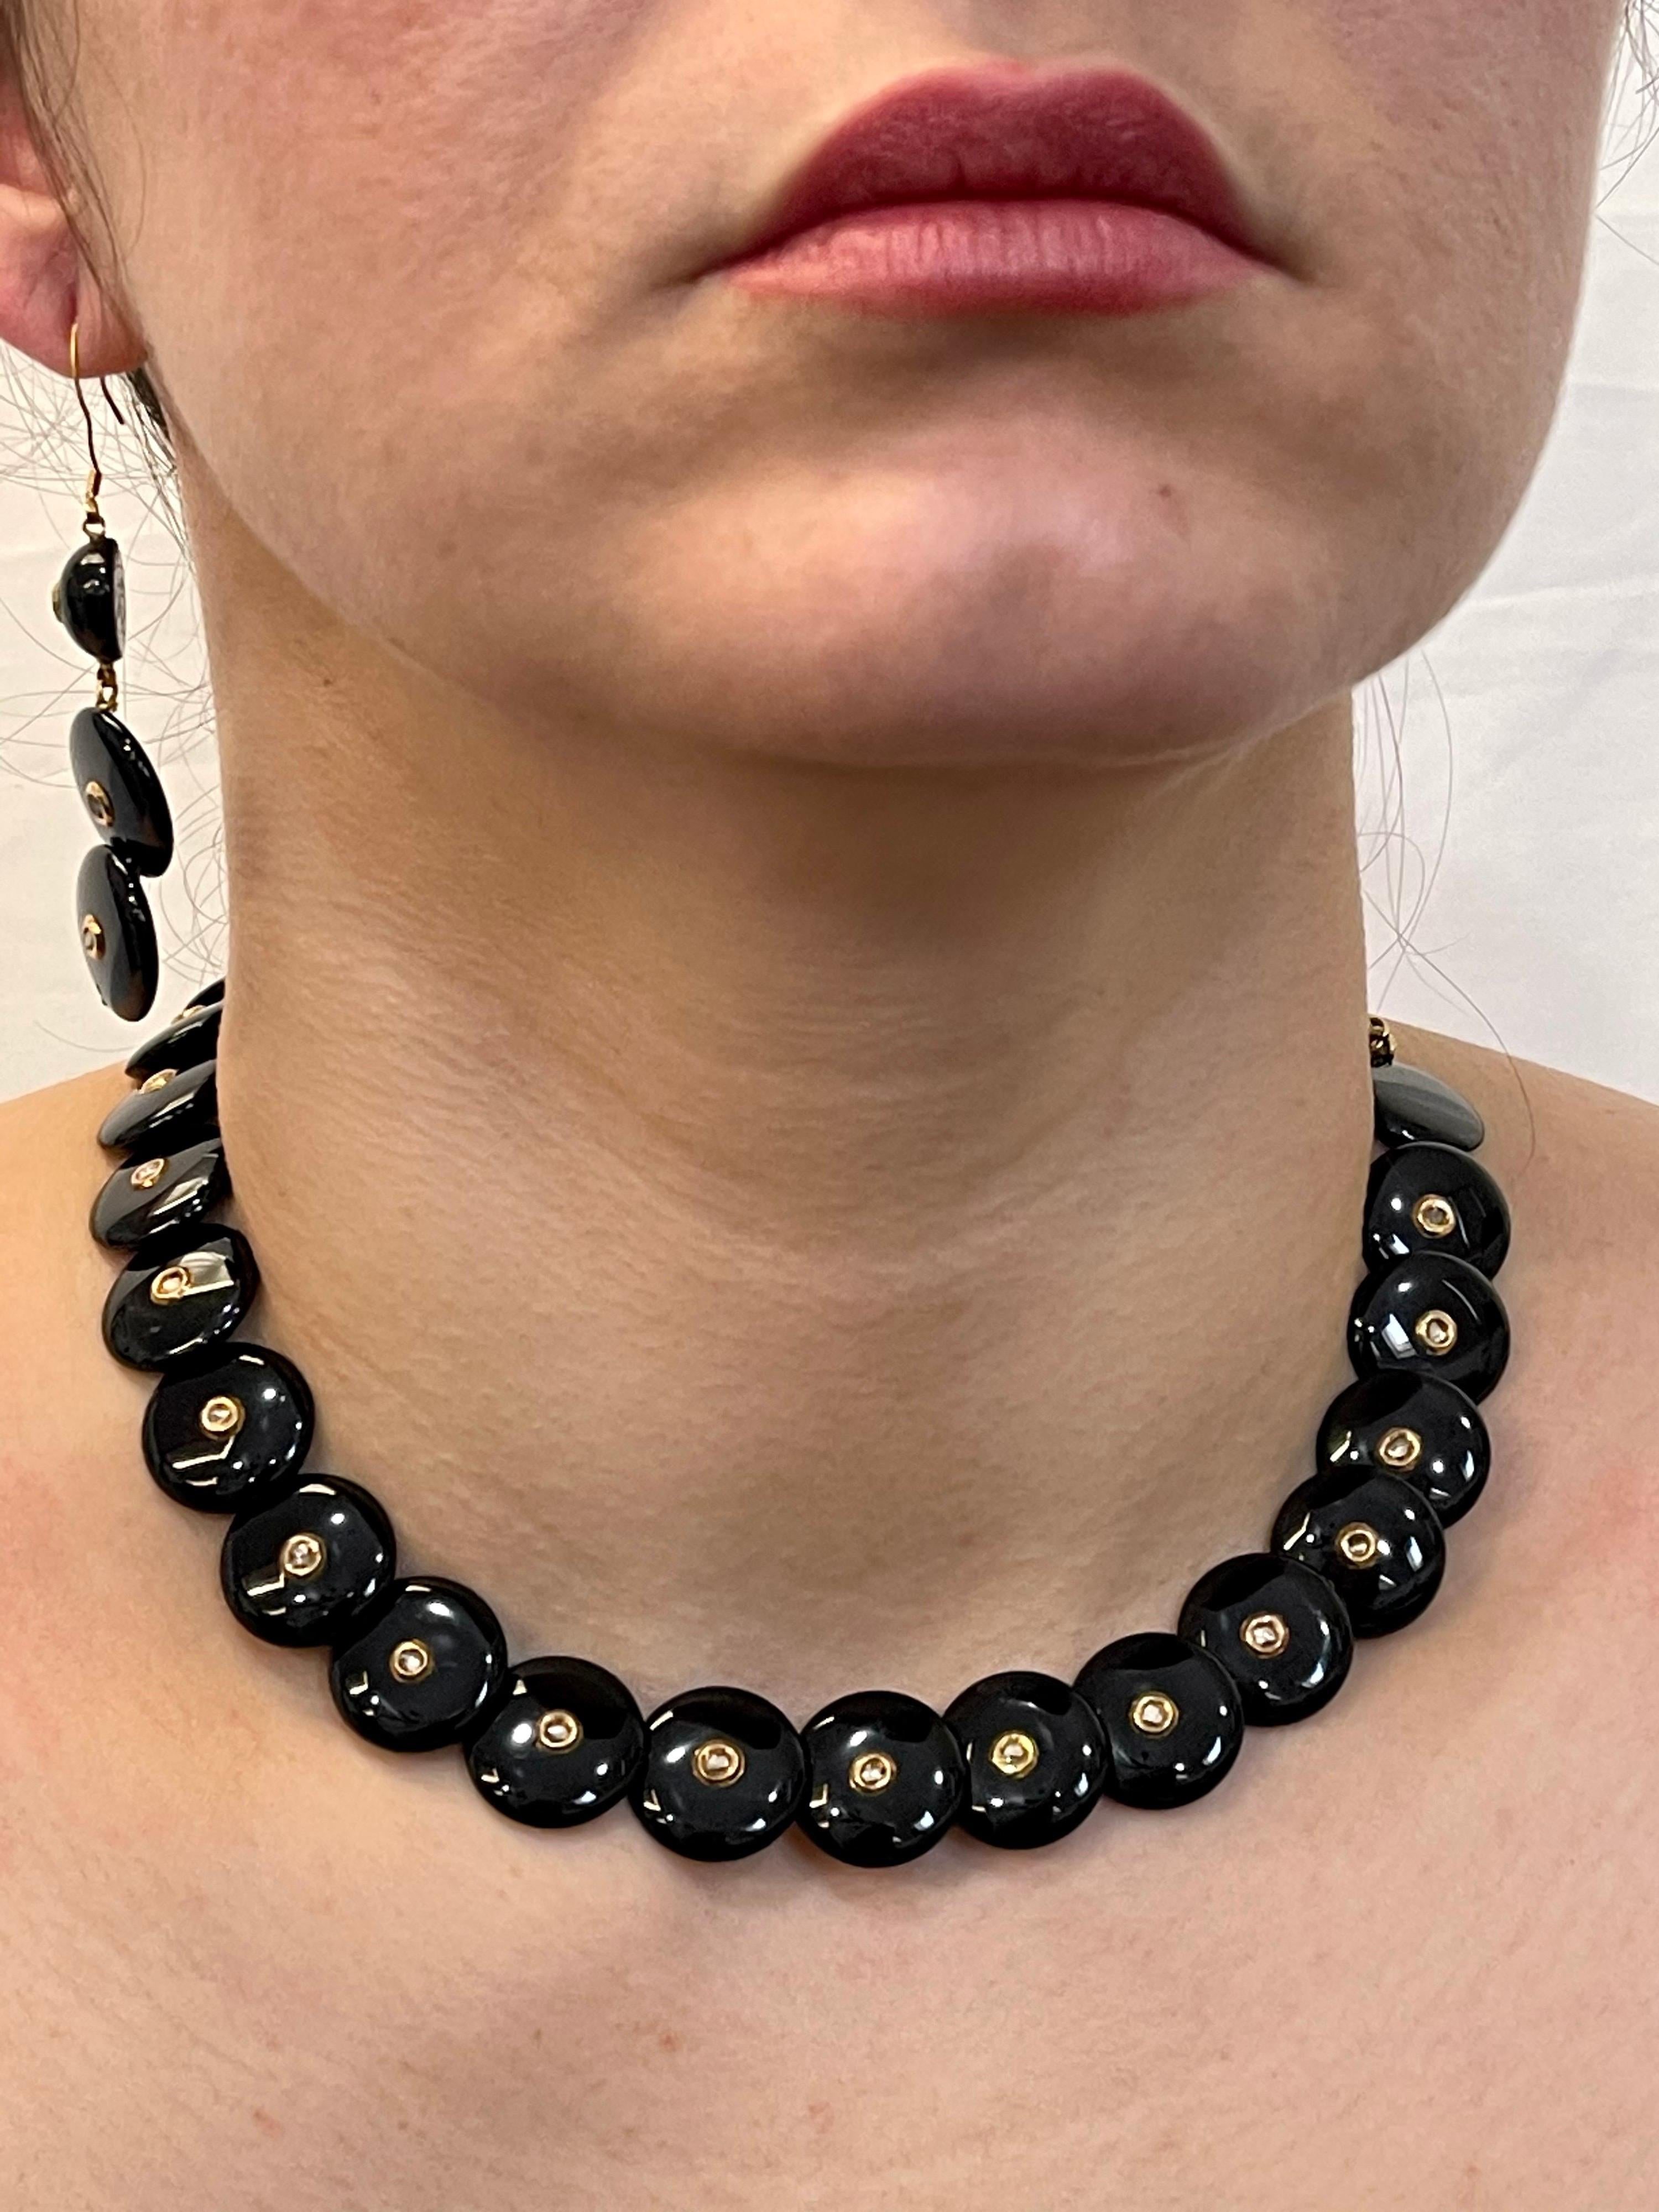 Round Circle Black Onyx With Rose cut Diamond 18 K Yellow Gold Necklace, Earring
Black Ony round circles of 1.5 CM radius are attached in a row .Each circle has a tiny rose cut diamond set in 18 Karat yellow gold .
Comes with matching Fish hook